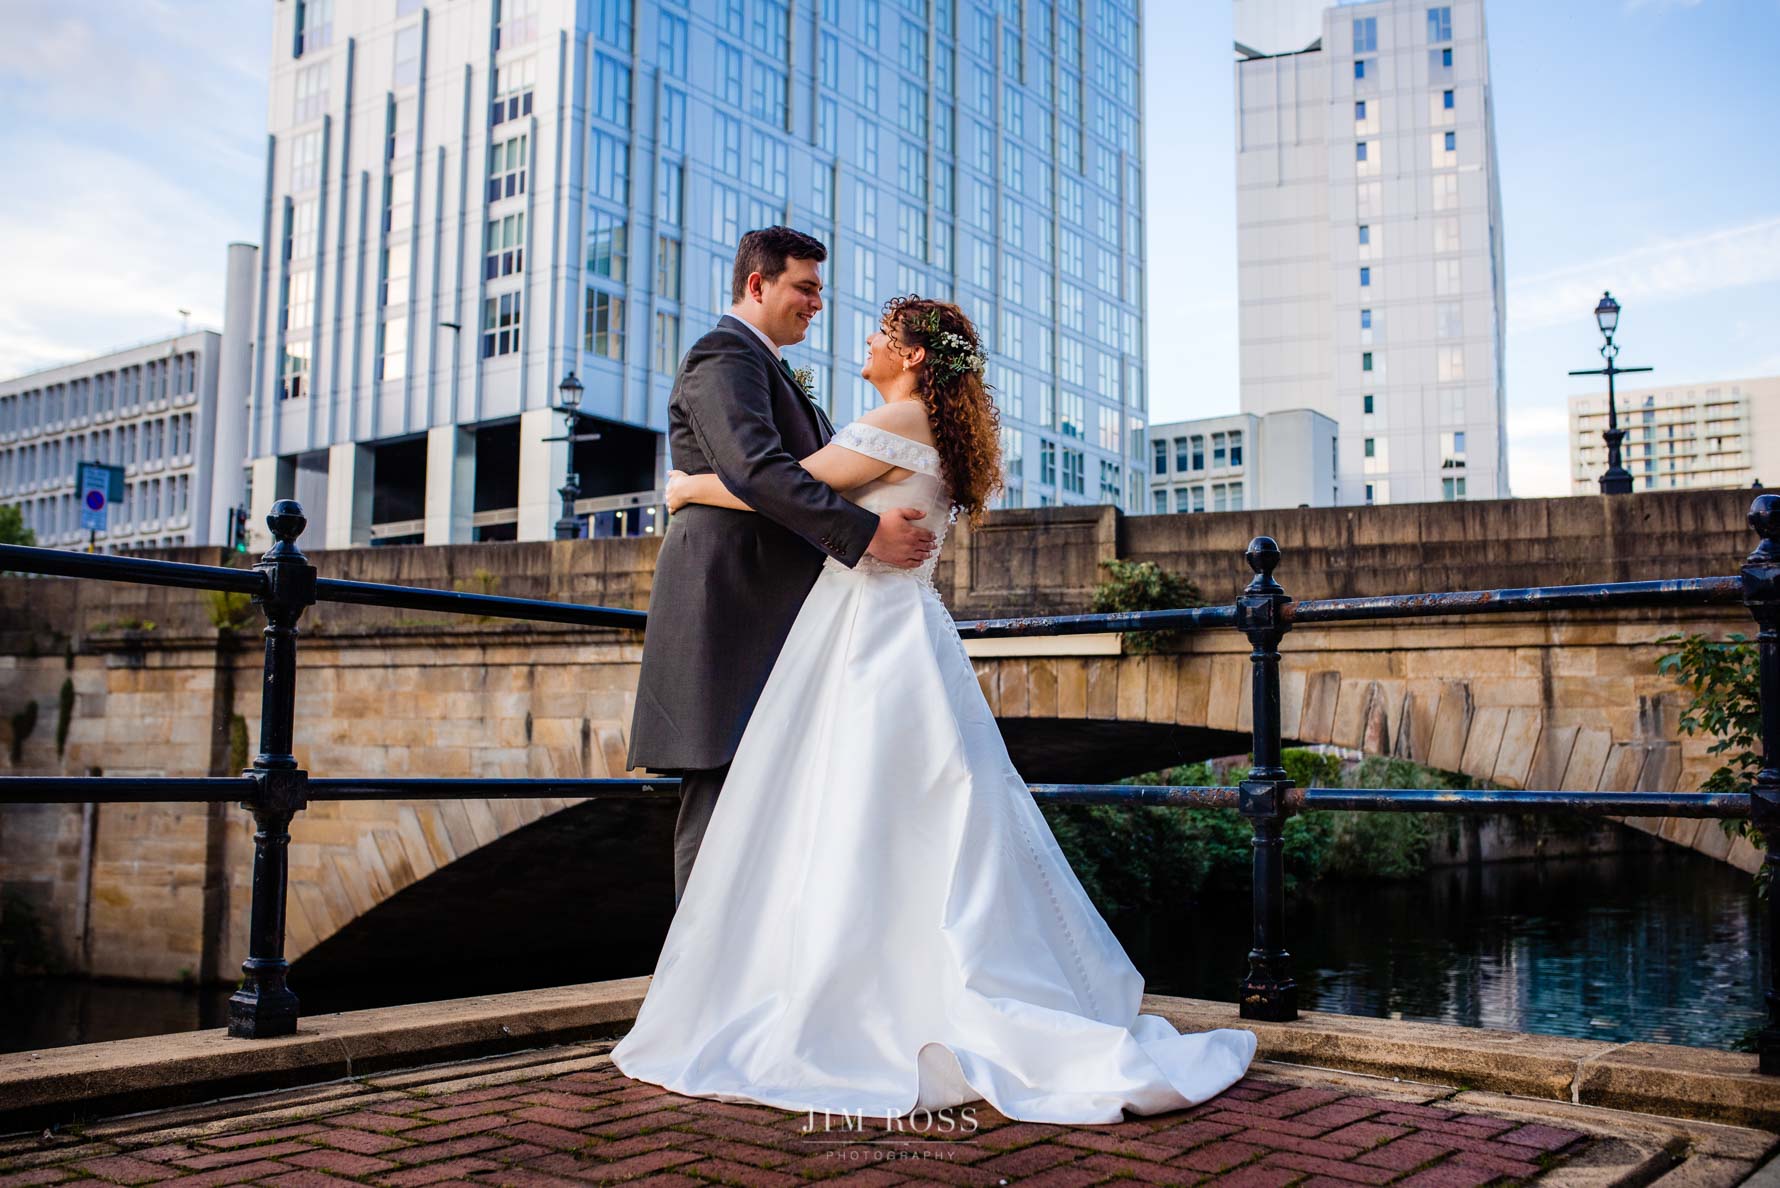 dramatic newlywed portrait in manchester